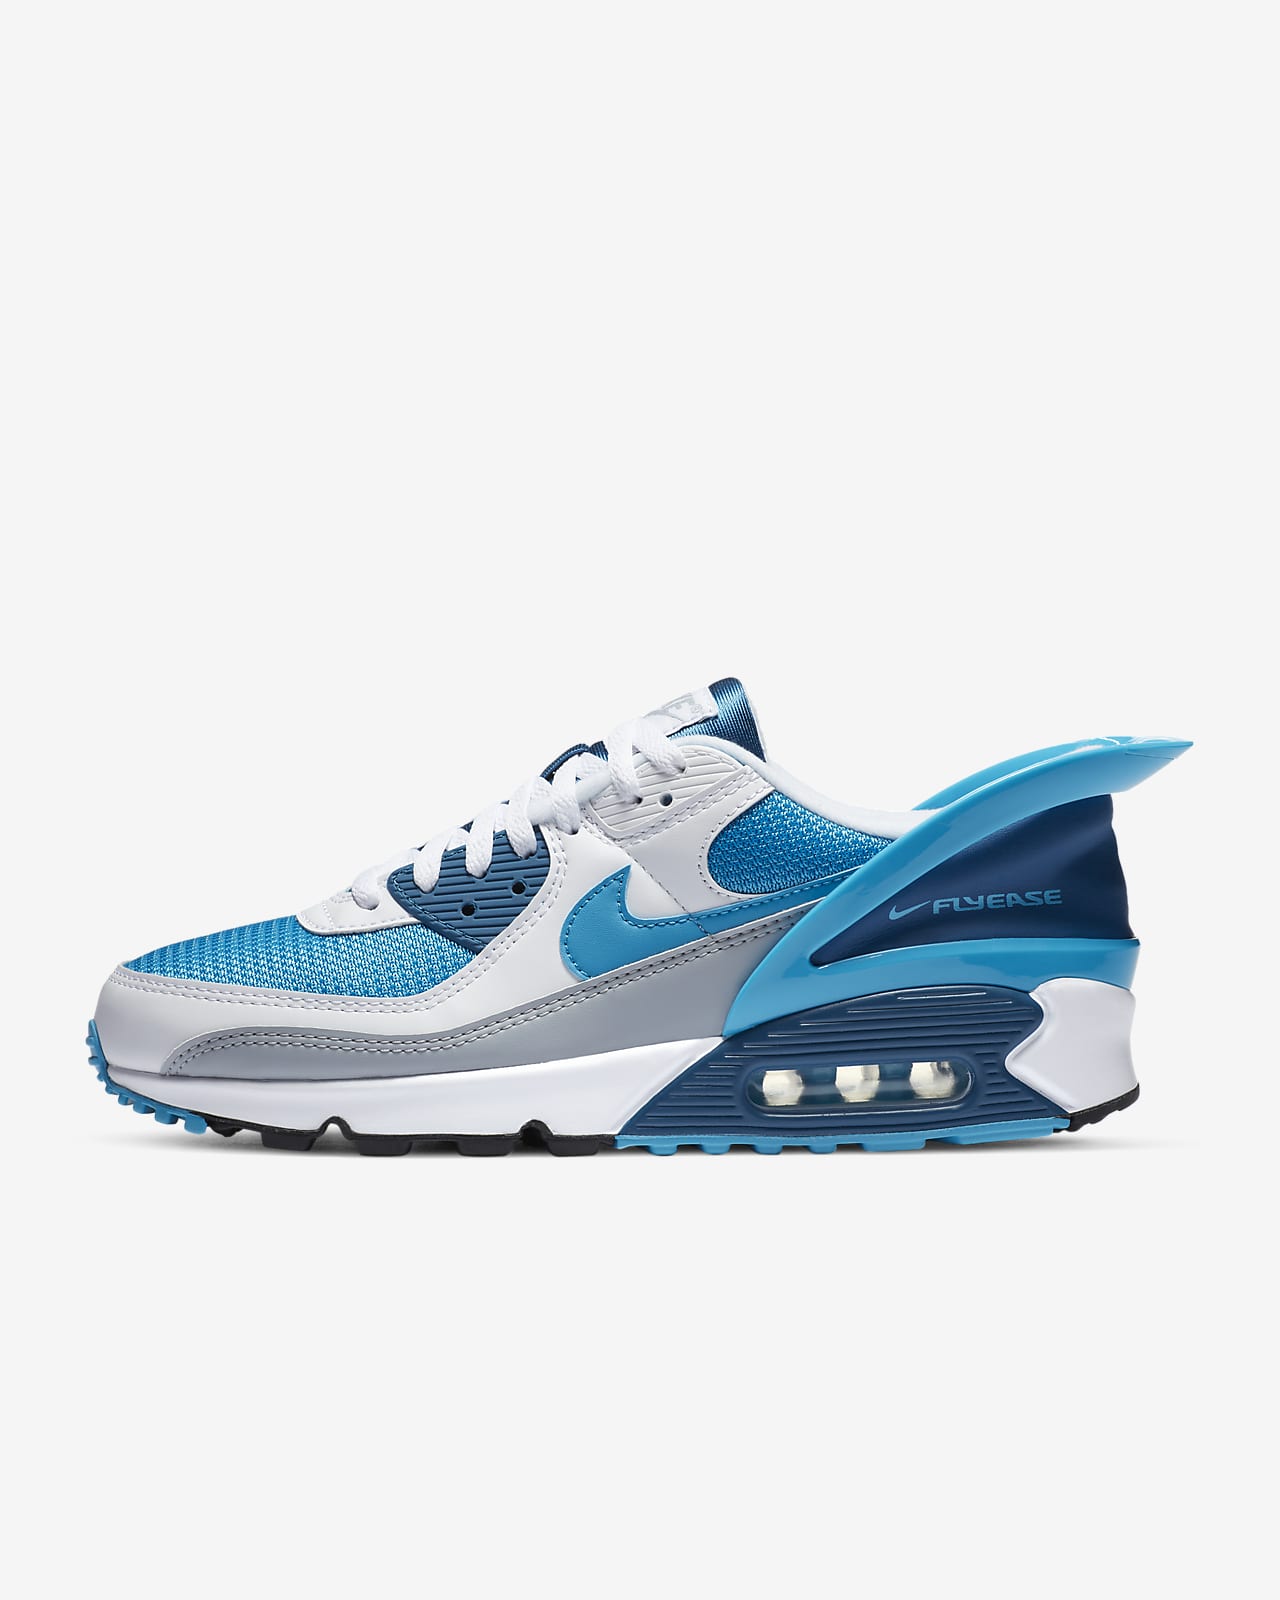 Nike Air Max 90 FlyEase Shoes